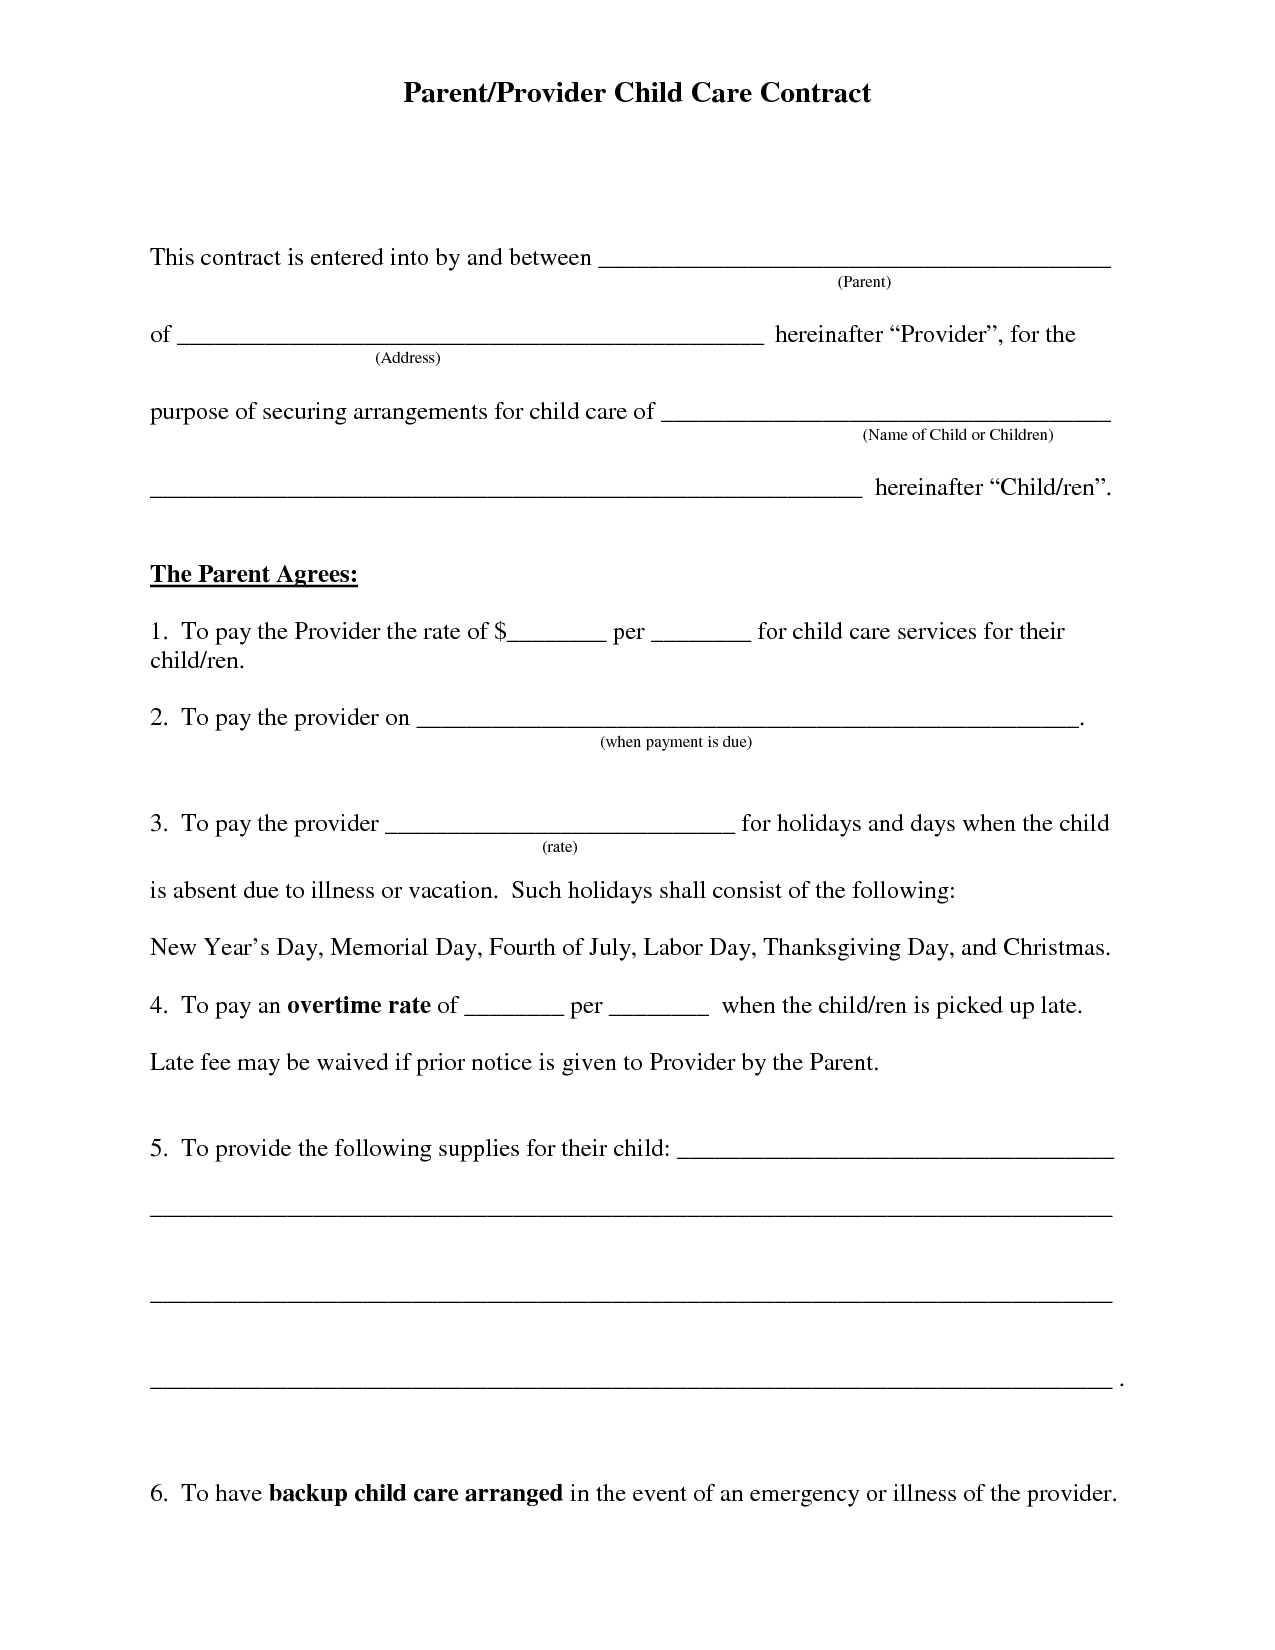 Free Daycare Contract Forms | Daycare Forms | Daycare Contract, Home - Free Printable Daycare Forms For Parents